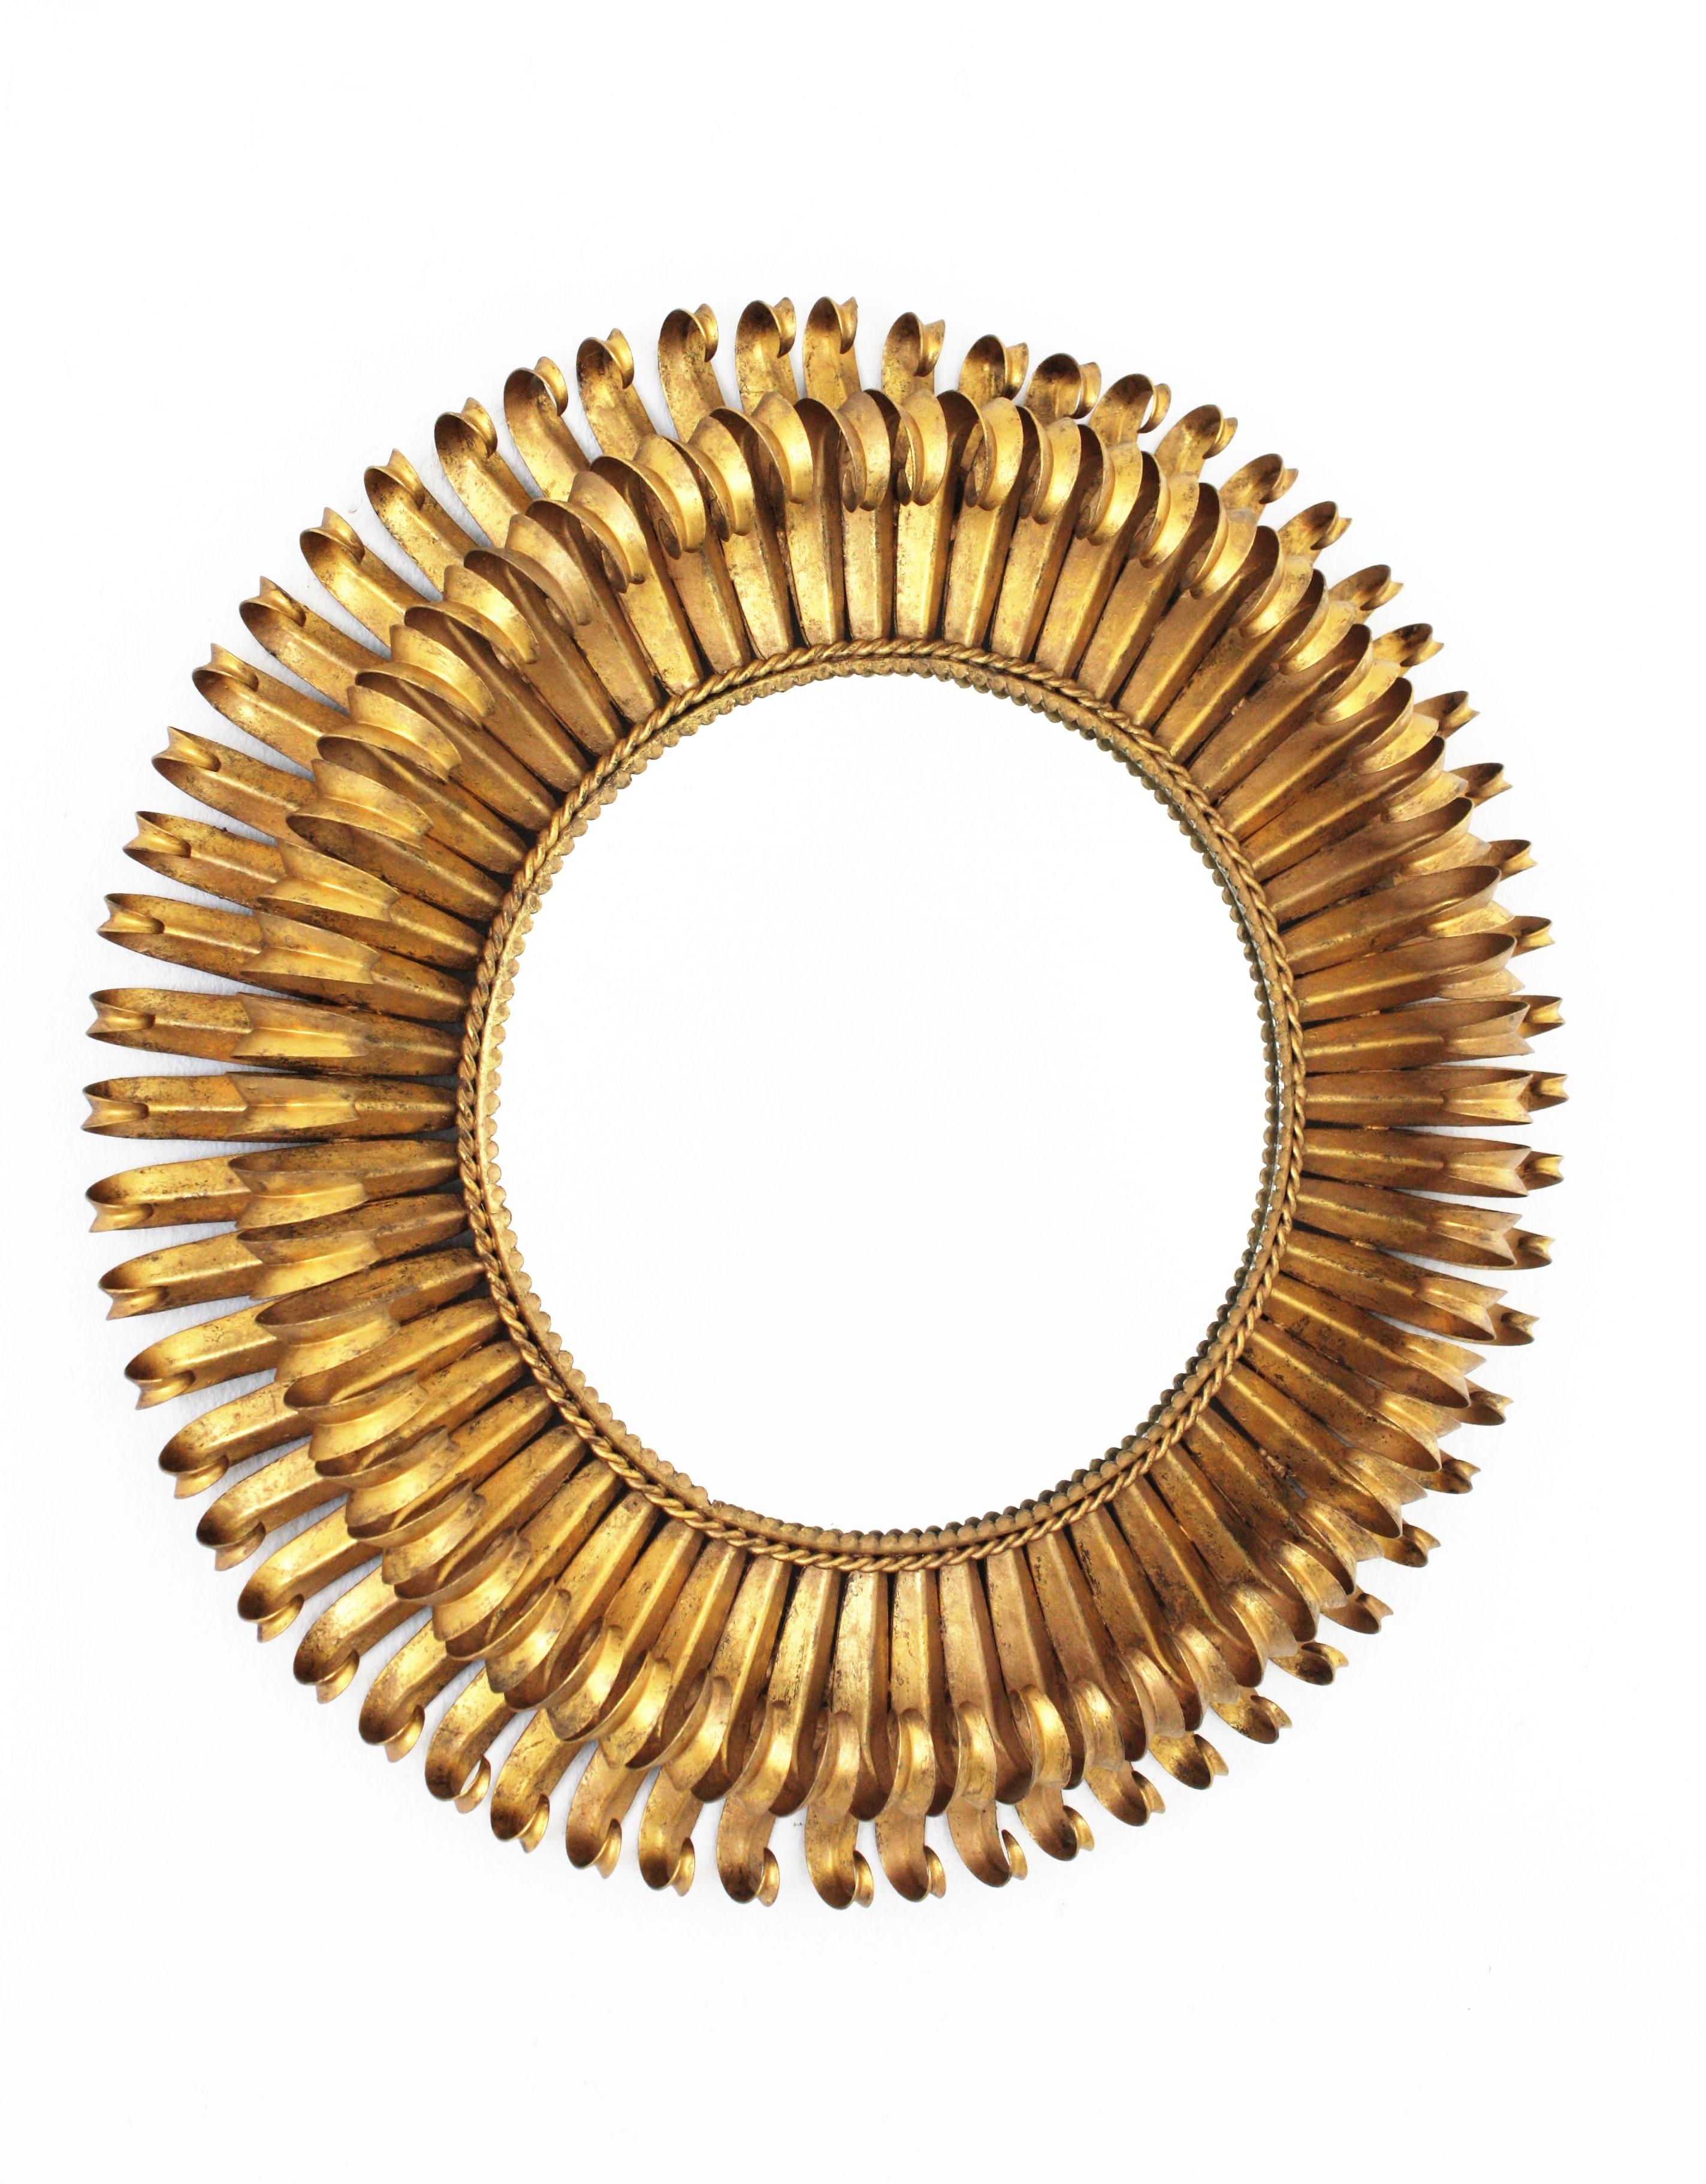 Lovely 1950s hand-hammered double layered eyelashed gilt iron sunburst mirror with gold leaf finish and circular shape.
The frame is made by a double layer of curved beams in eyelash shape that makes the piece highly decorative. It has a beautiful